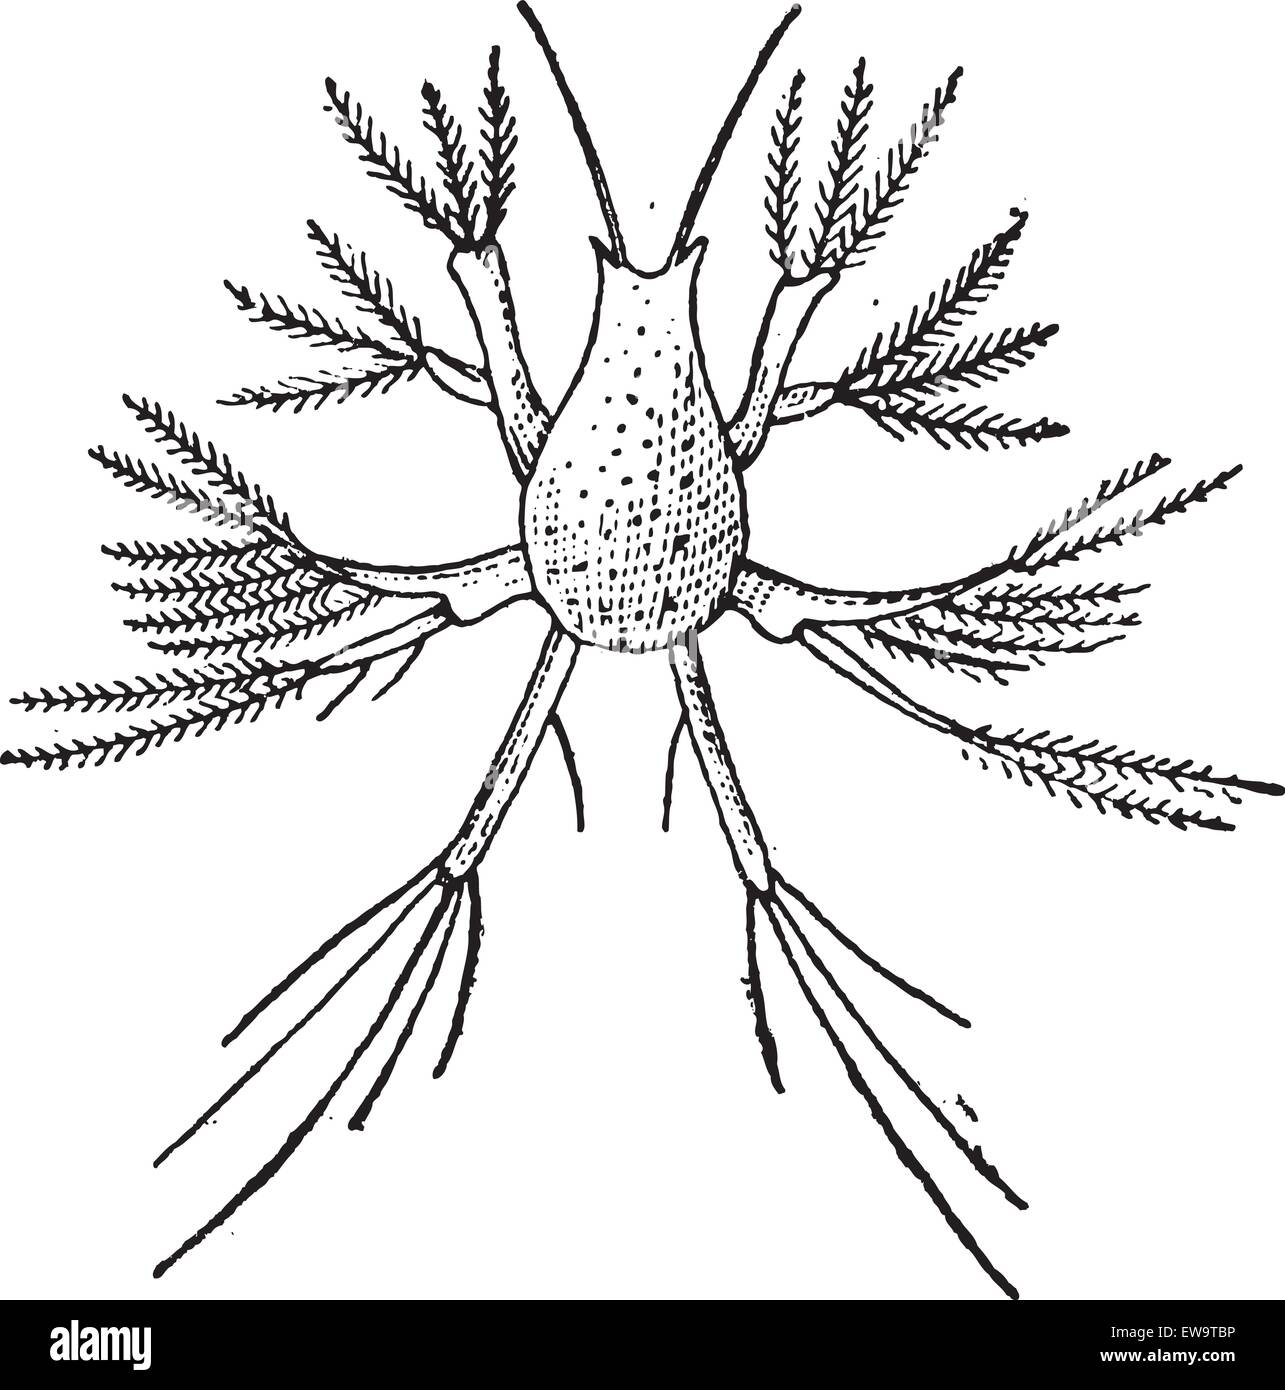 Copepod or Copepoda, vintage engraved illustration. Dictionary of Words and Things - Larive and Fleury - 1895 Stock Vector